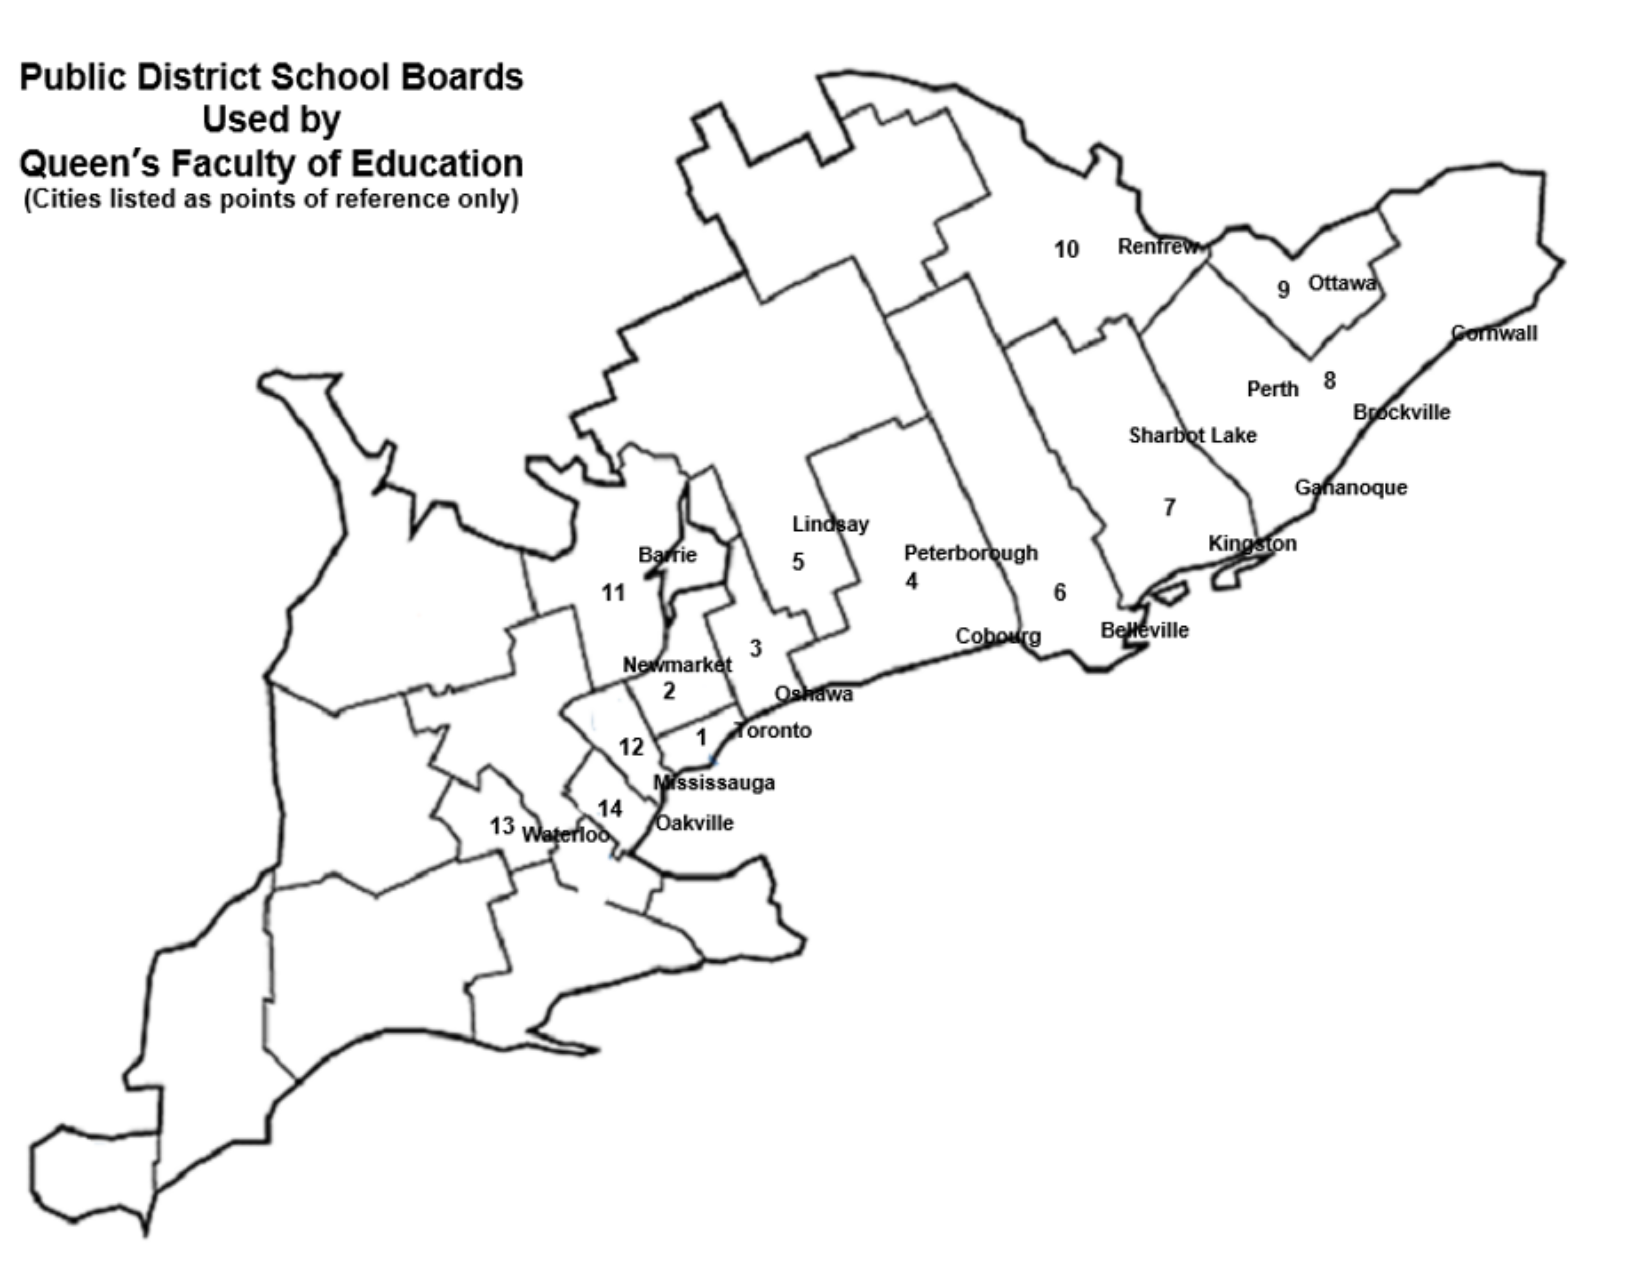 Map of Public District School Boards used by Faculty of Education 